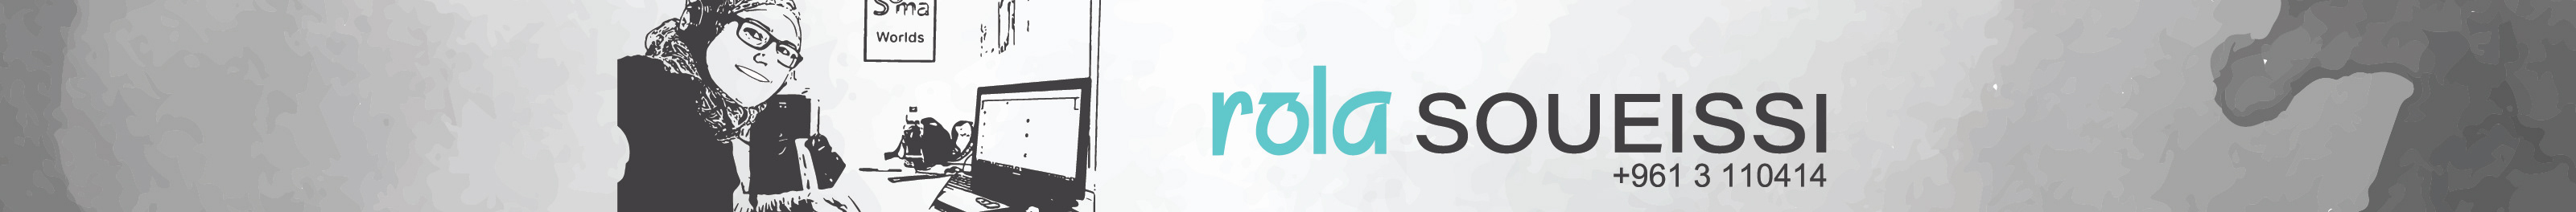 rola soueissis profilbanner